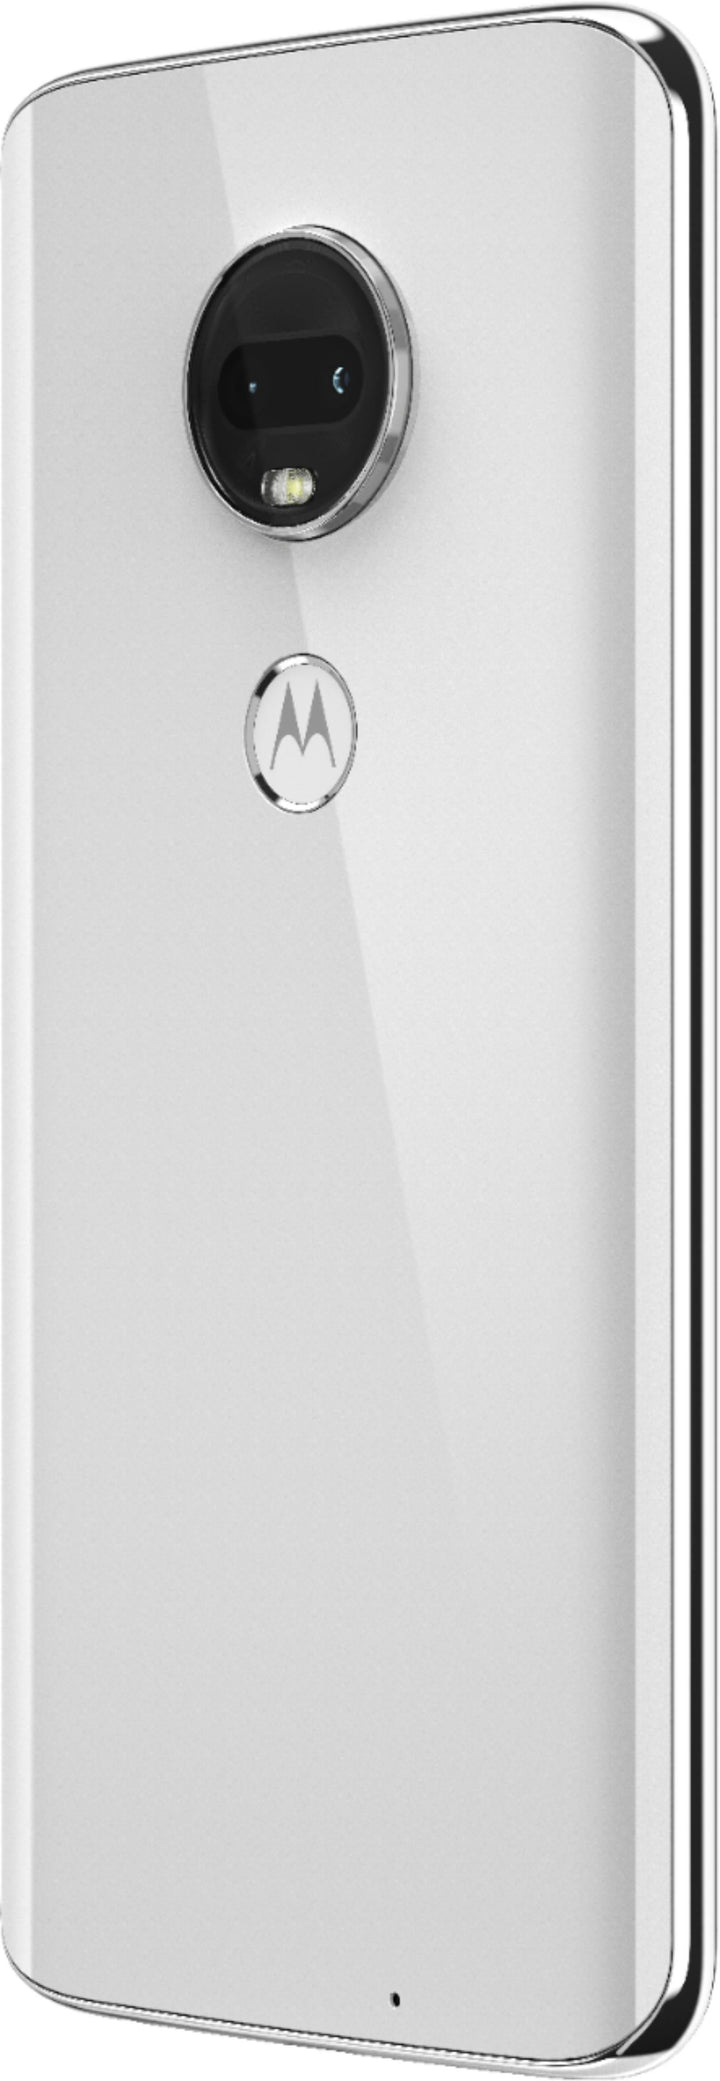 Motorola - Geek Squad Certified Refurbished moto g⁷ with 64GB Memory Cell Phone (Unlocked) - Clear White_4